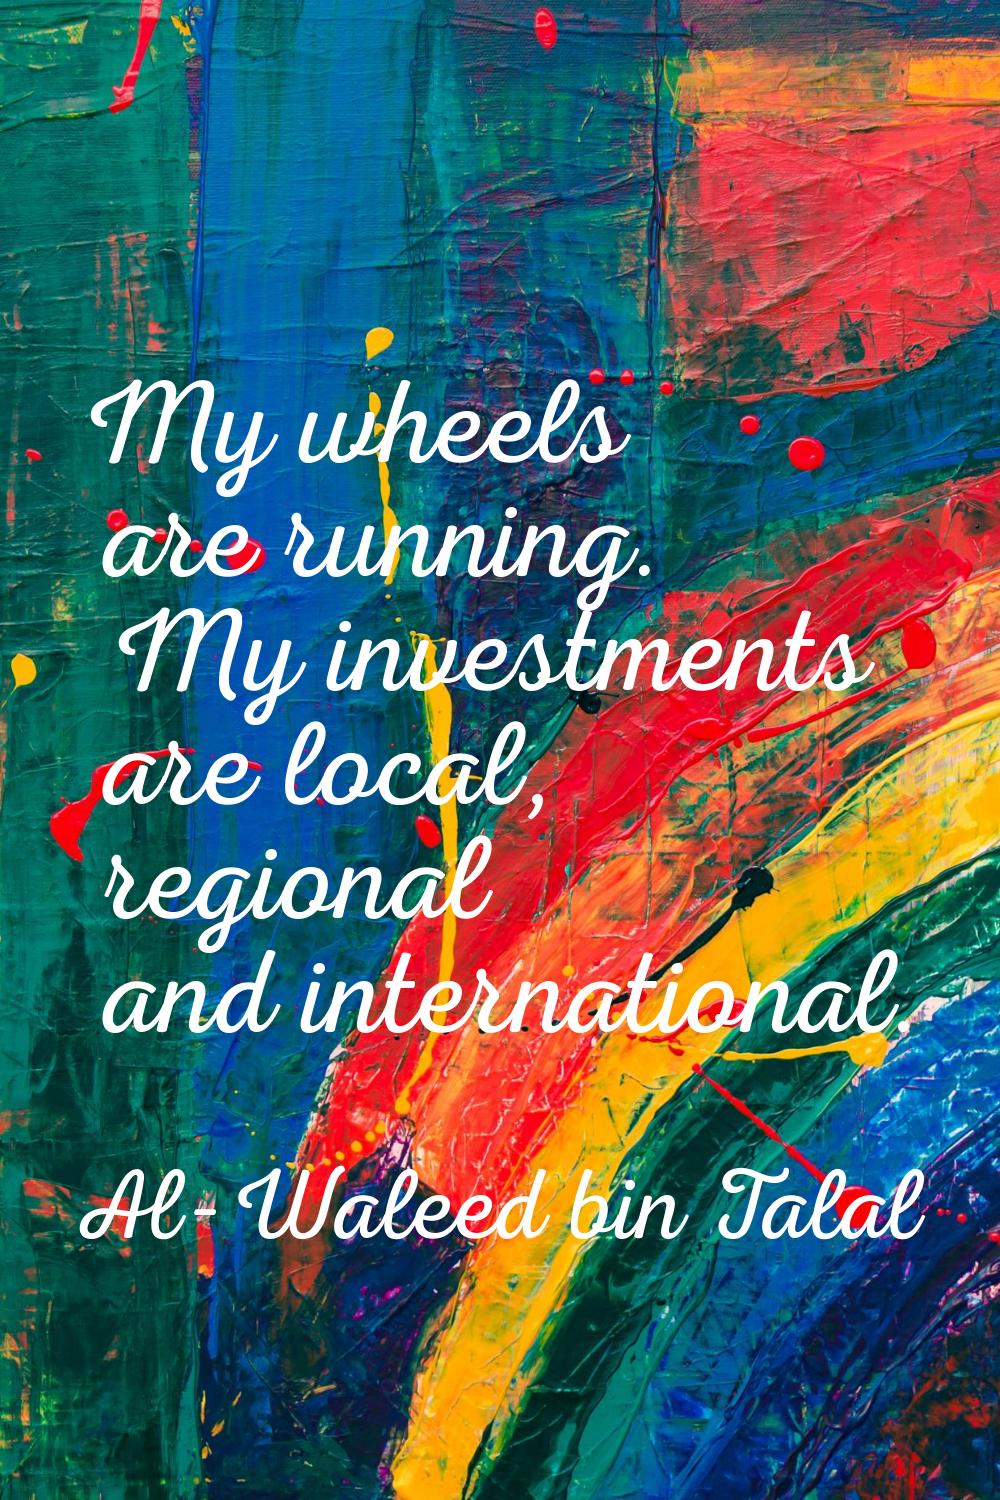 My wheels are running. My investments are local, regional and international.